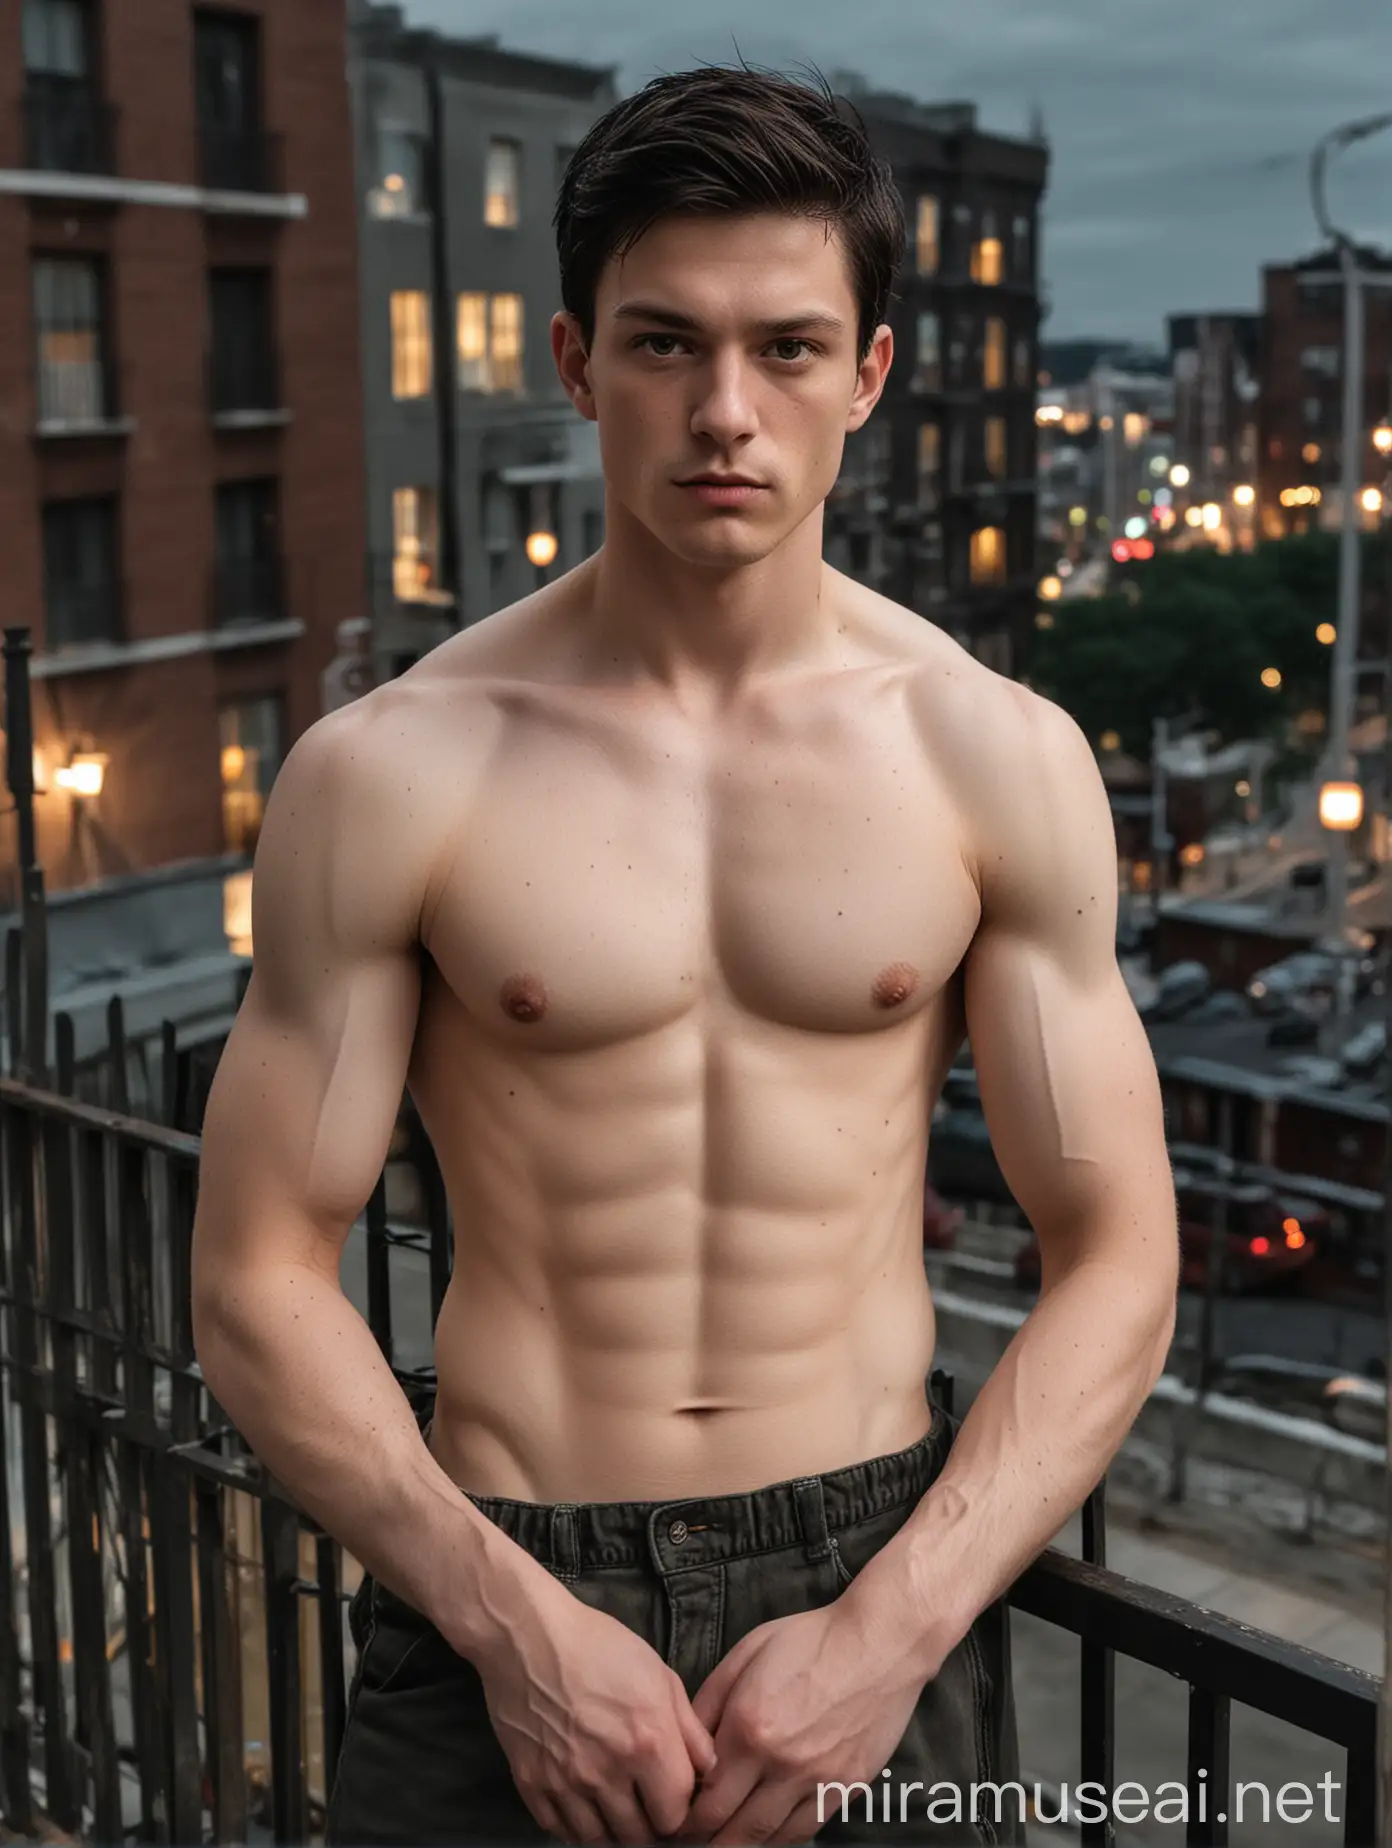 The subject of the portrait is a man with white, pale skin and a flawless physique and athletic body while looking at the camera intently. He’s topless and have short regulation-cut black hair. He is leaning at the railings of building. The image should prominently highlight his brown eyes while ensuring the eye and hair color remain distinct. The background should be a night time and buildings with lots of city lights.